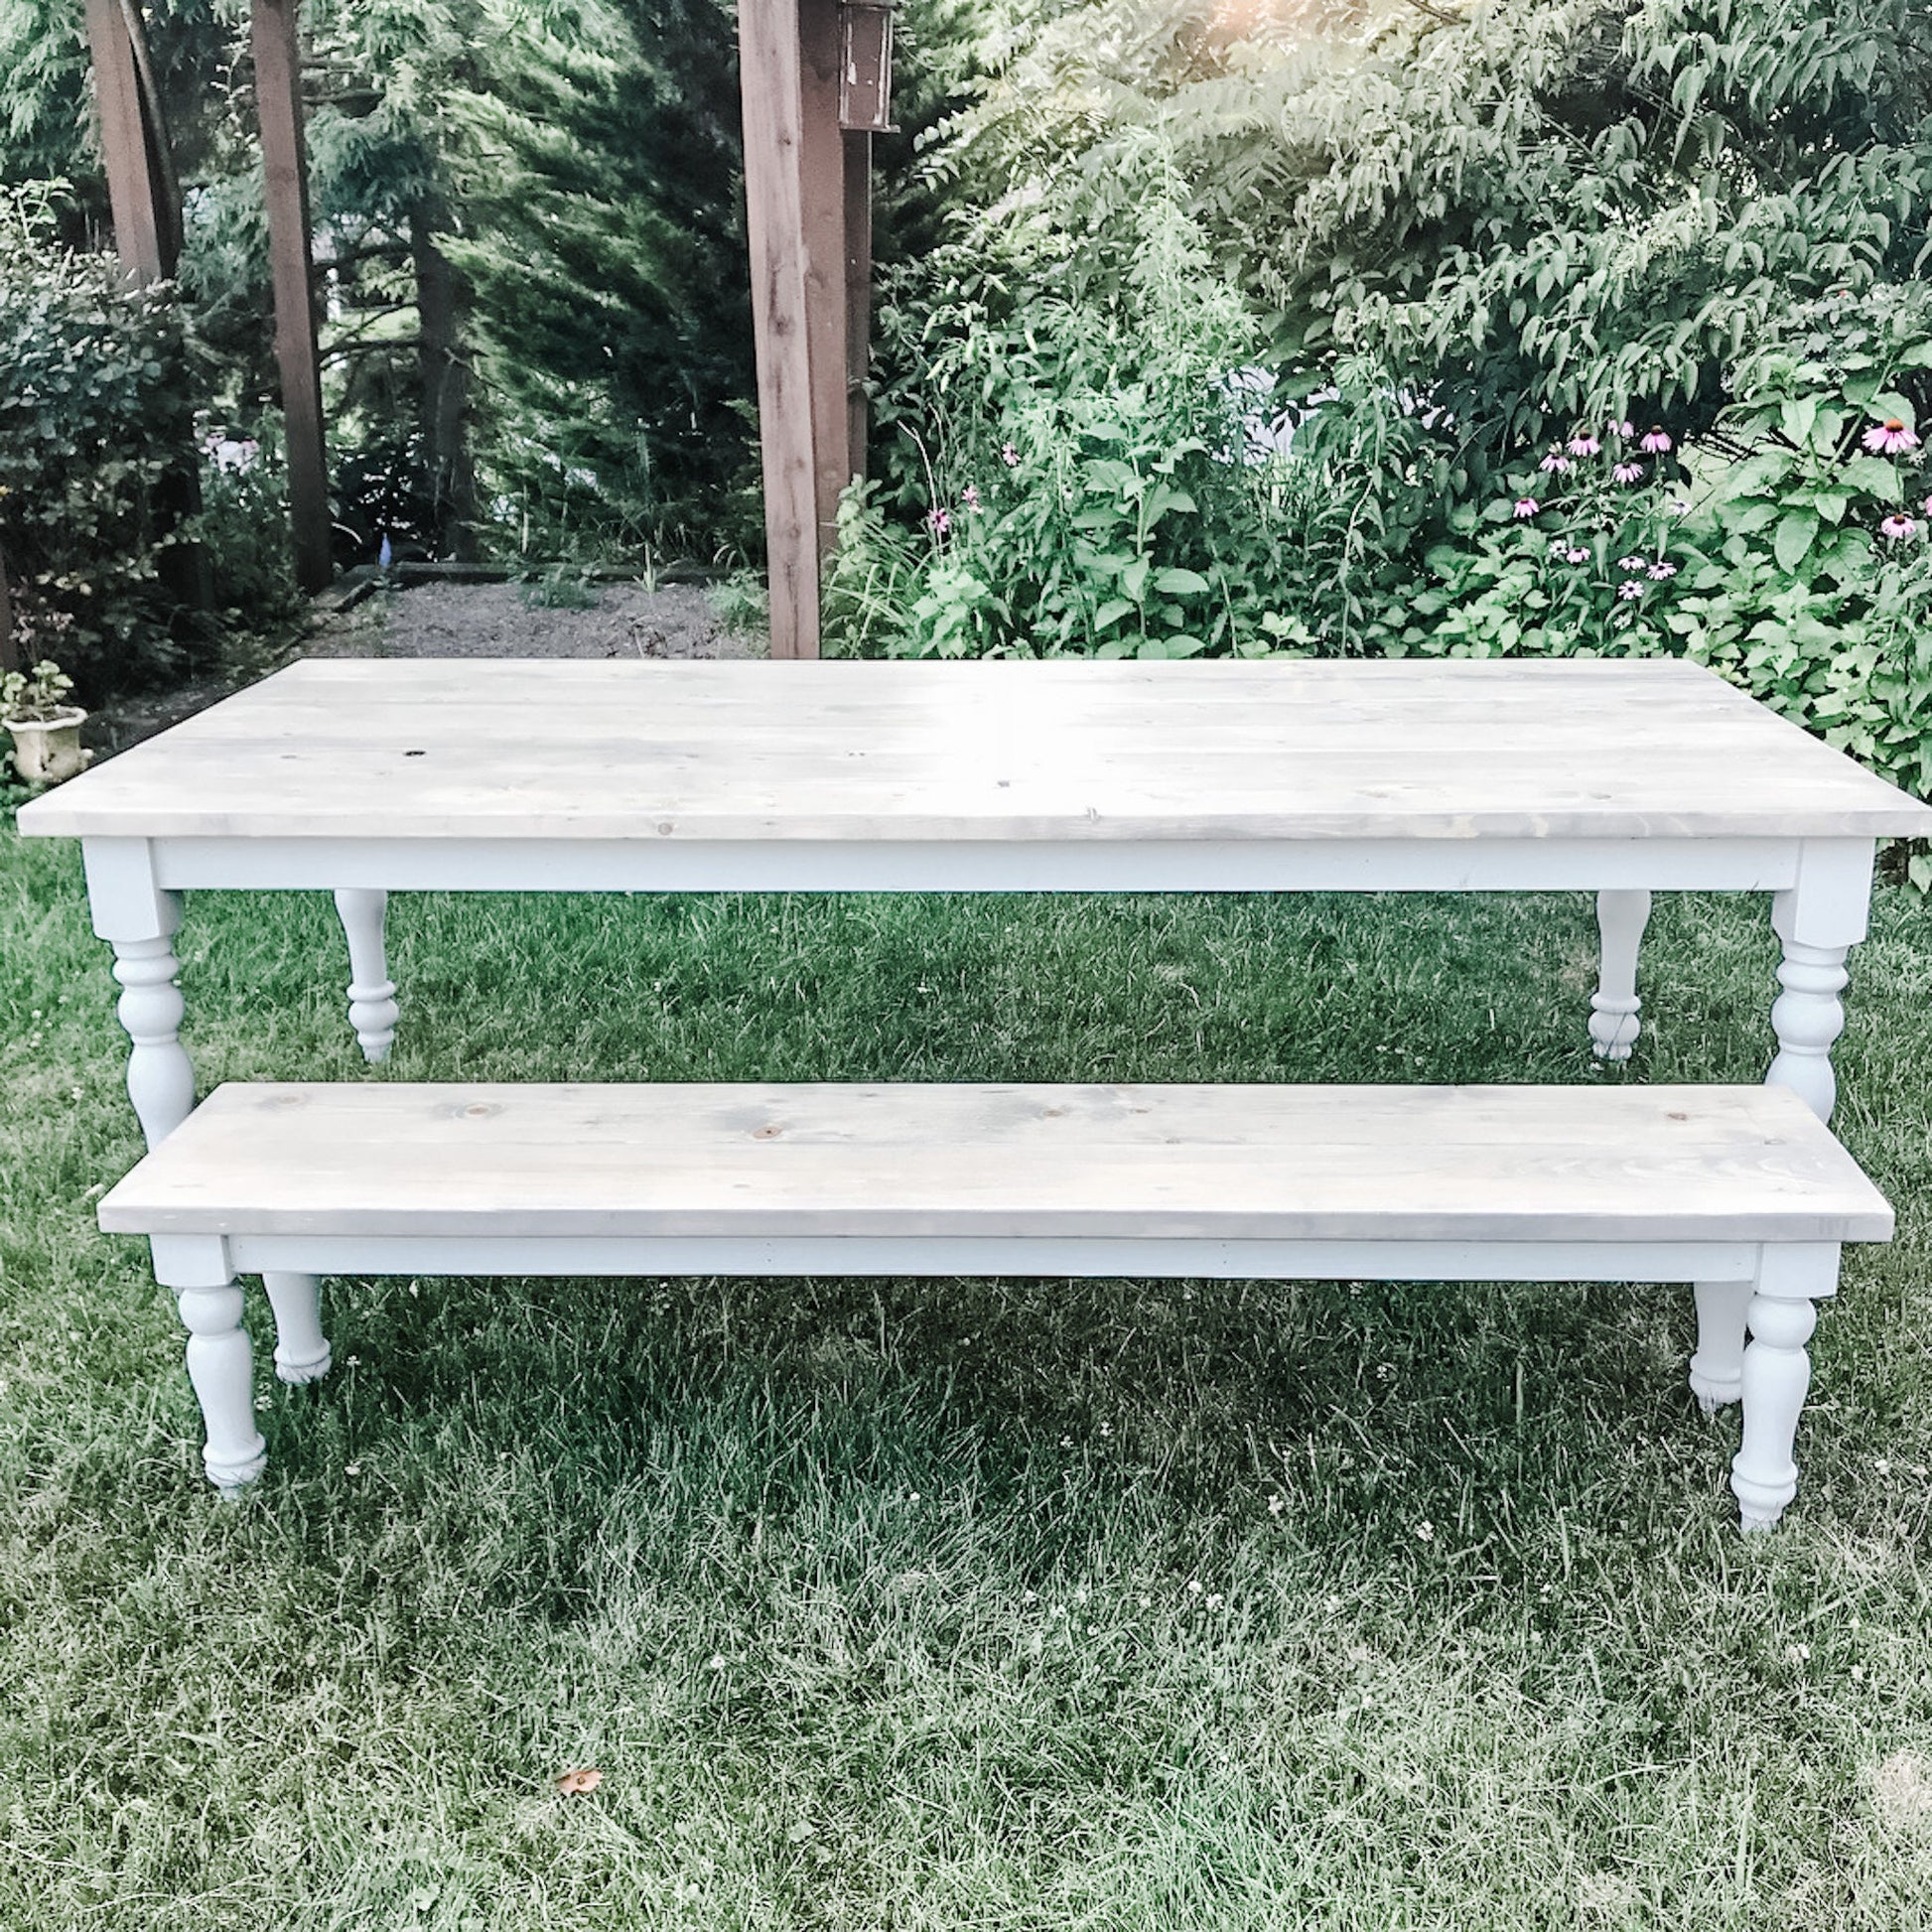 Large Farmhouse Table, Gray Farmhouse Table, Turned Leg Farm Table, Long Farmhouse Table, Kitchen Table, Rustic Dining Table - All Sizes!